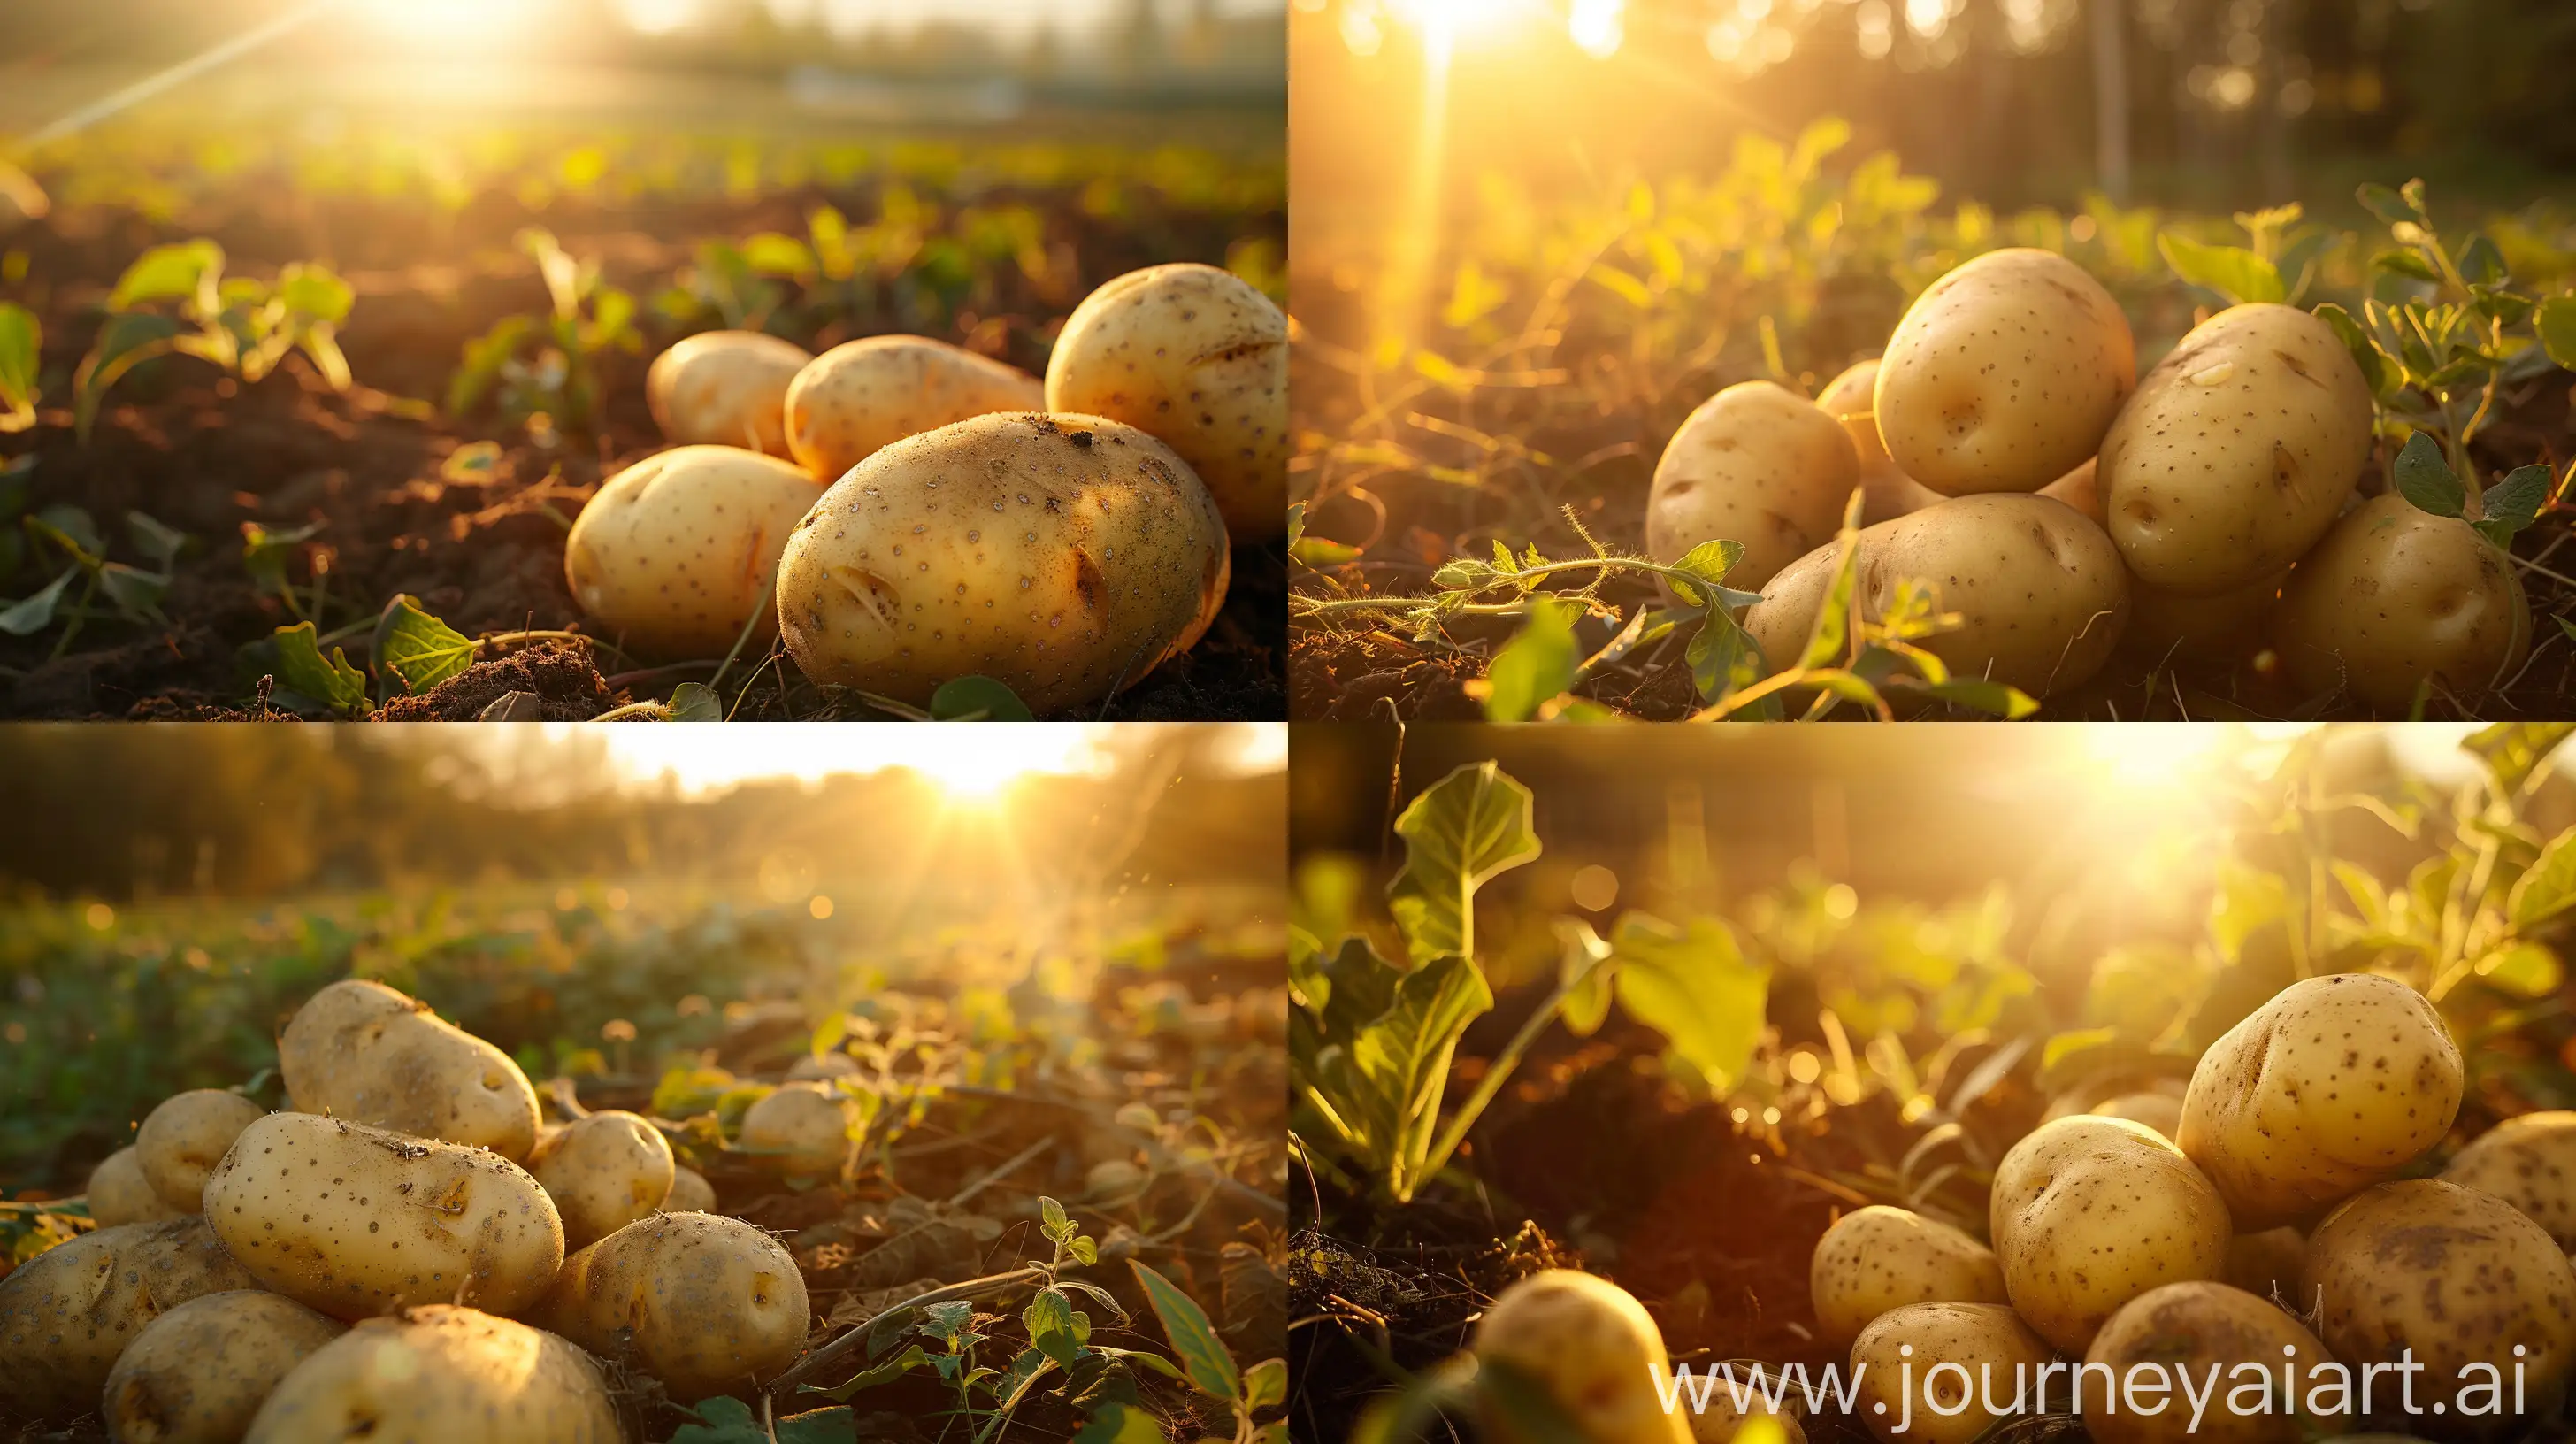 High detailed photo capturing a Potato, Kennebec. The sun, casting a warm, golden glow, bathes the scene in a serene ambiance, illuminating the intricate details of each element. The composition centers on a Potato, Kennebec. A popular all-purpose potato with smooth skin and texture, and white flesh that resists late blight and yields heavily at midseason. One package can yield 50-80 lb. of potatoes. Mini-tubers have 3-5 eyes each. Complete instructions are included.. The image evokes a sense of tranquility and natural beauty, inviting viewers to immerse themselves in the splendor of the landscape. --ar 16:9 